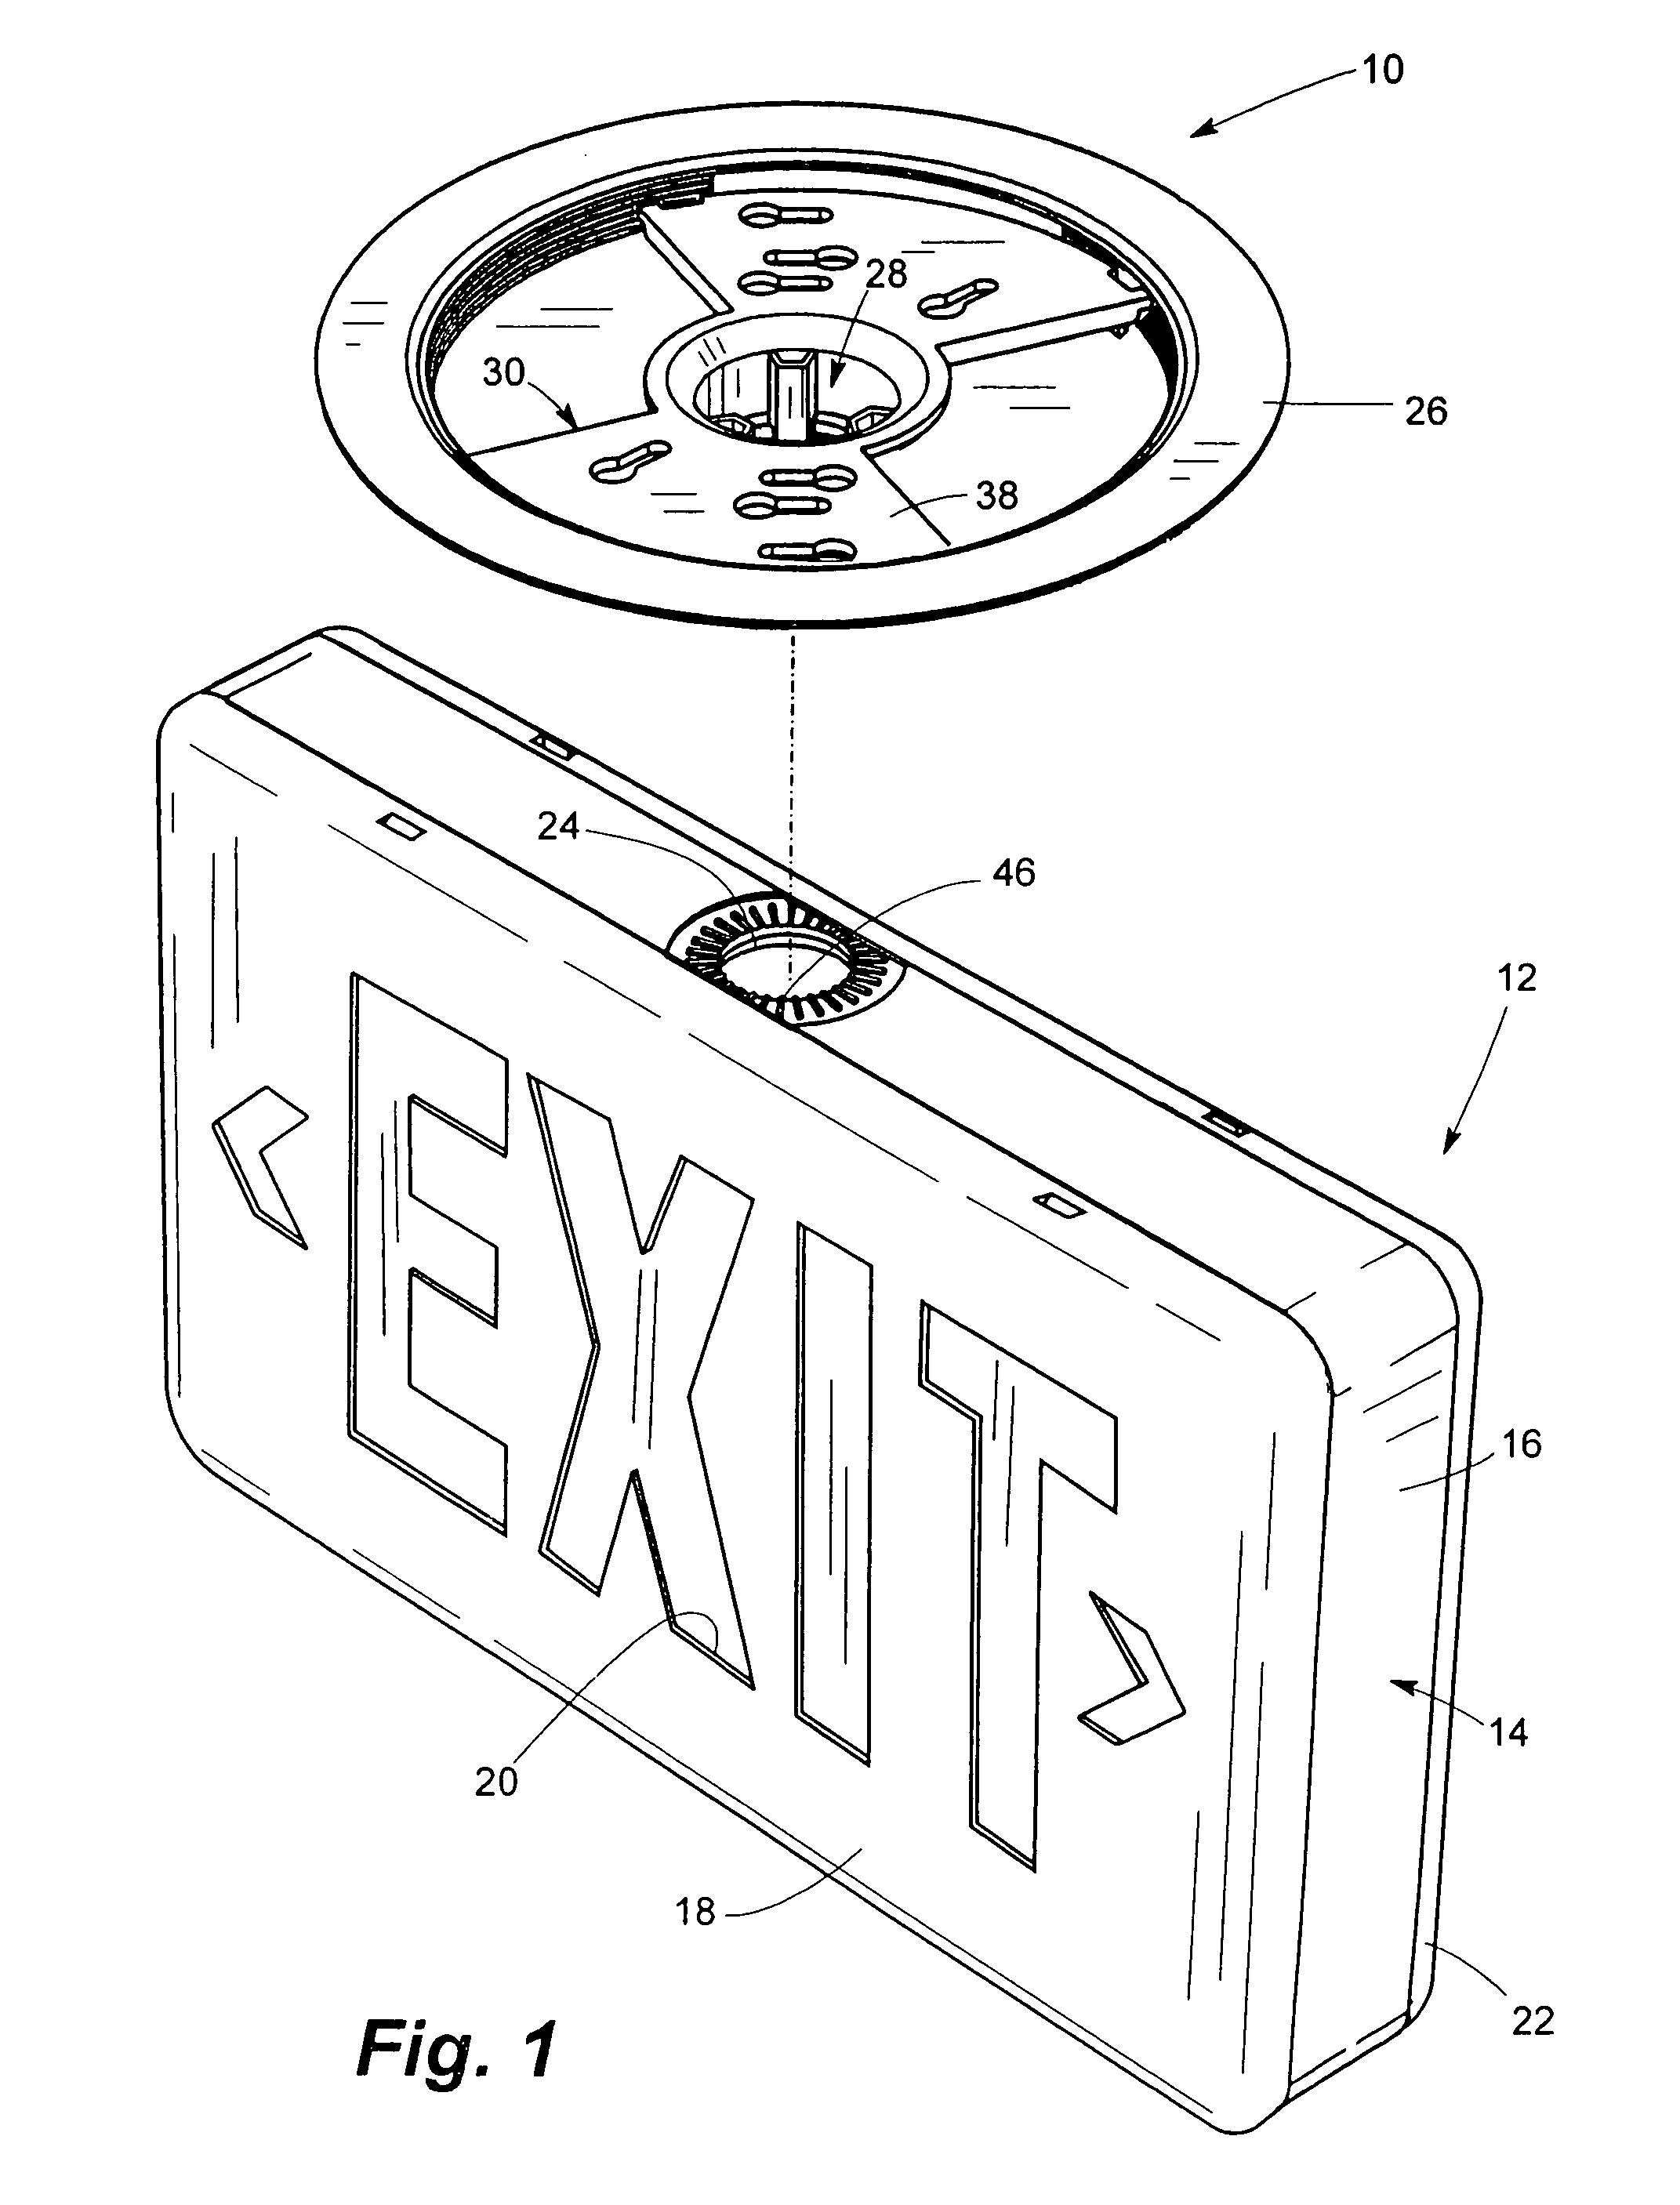 Mounting devices for exit signs and other fixtures